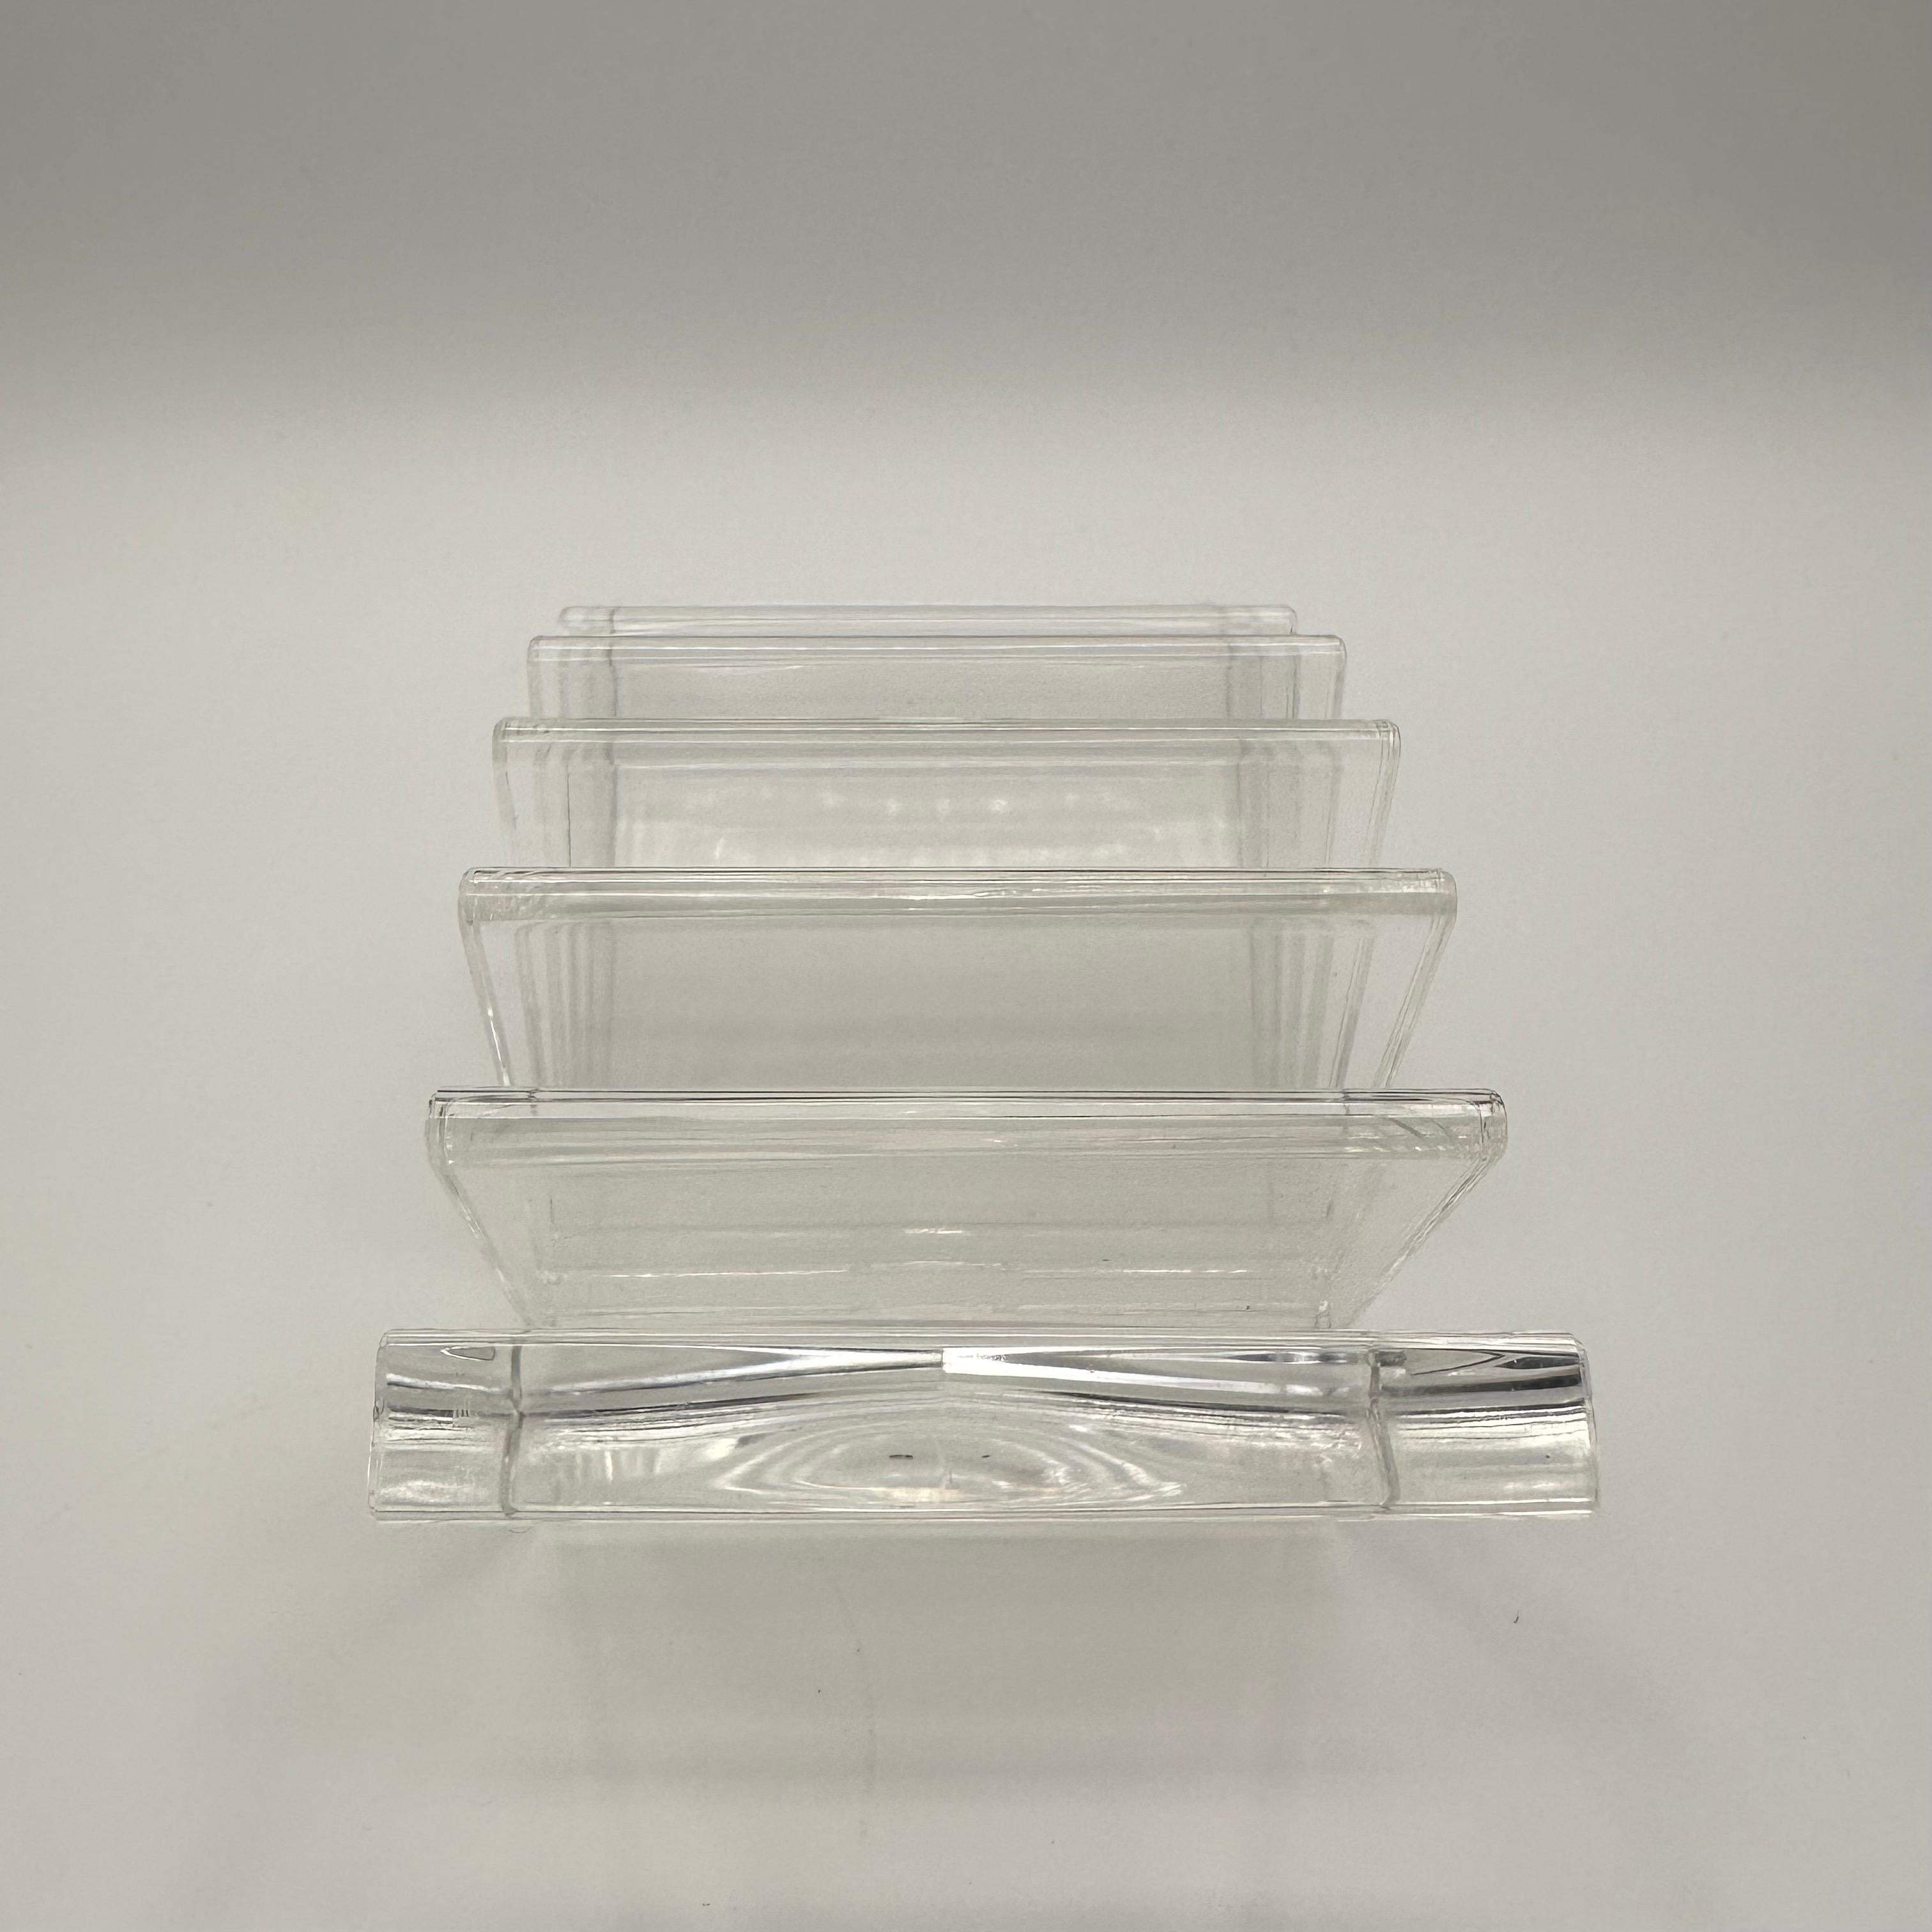 Late 20th Century Vintage Clear Lucite Fan Shaped Card Holder by Guzzini 1980s Made in Italy For Sale